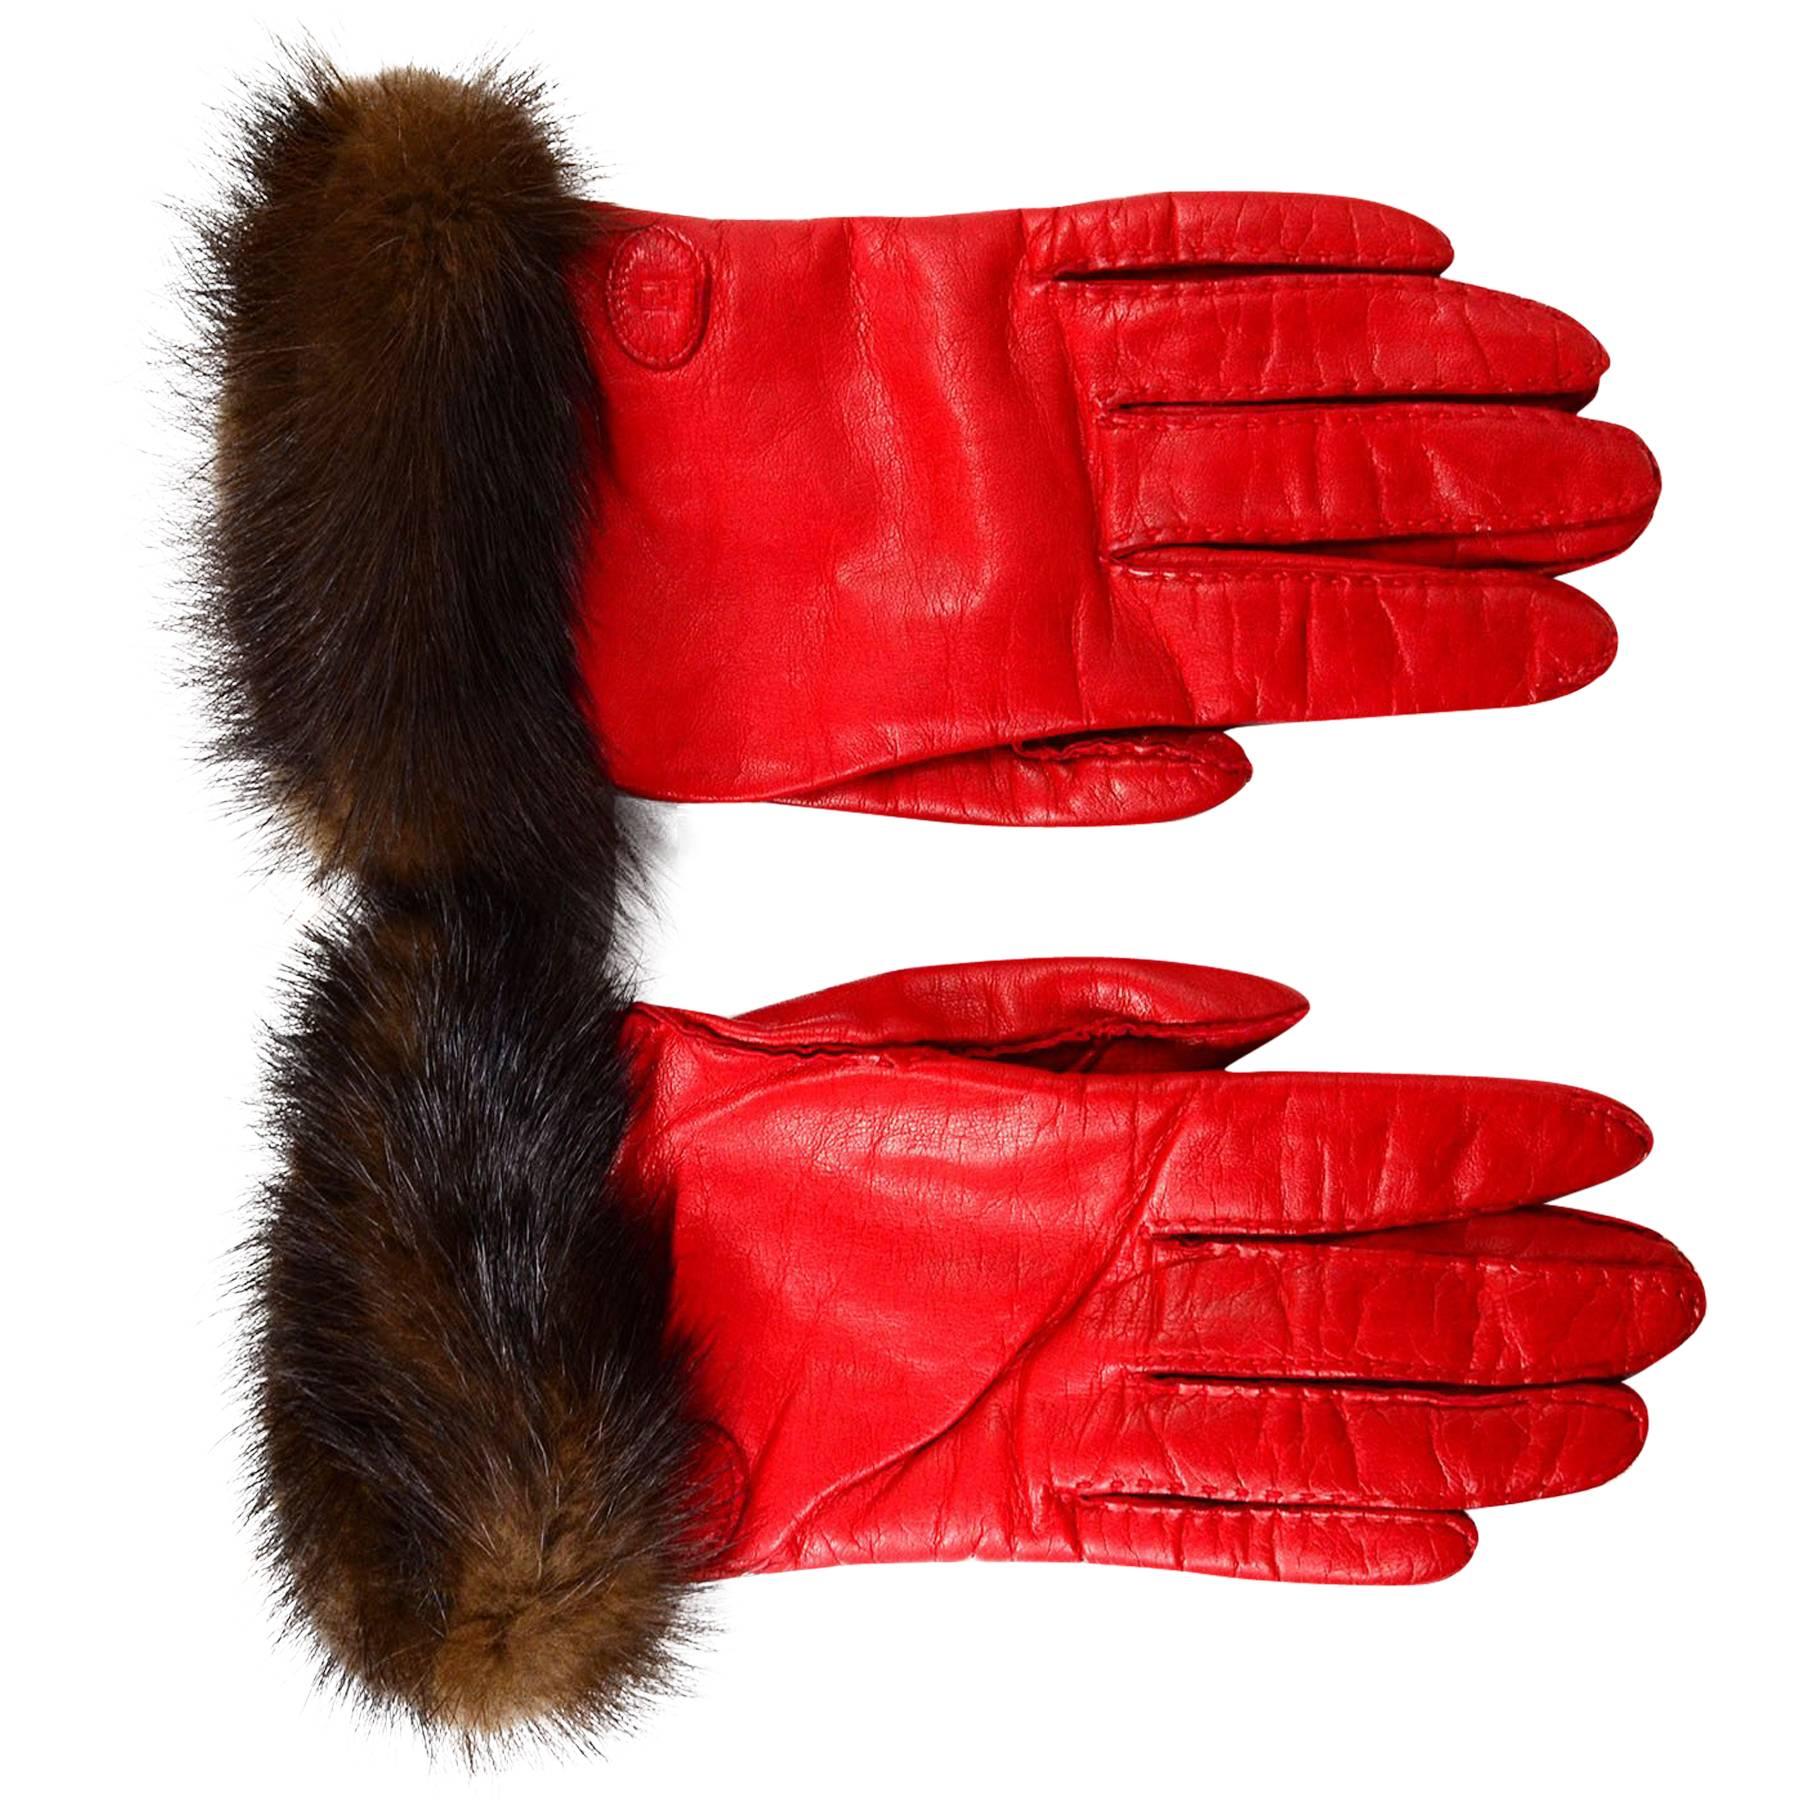 Fendi Red Leather and Mink Gloves Sz 7